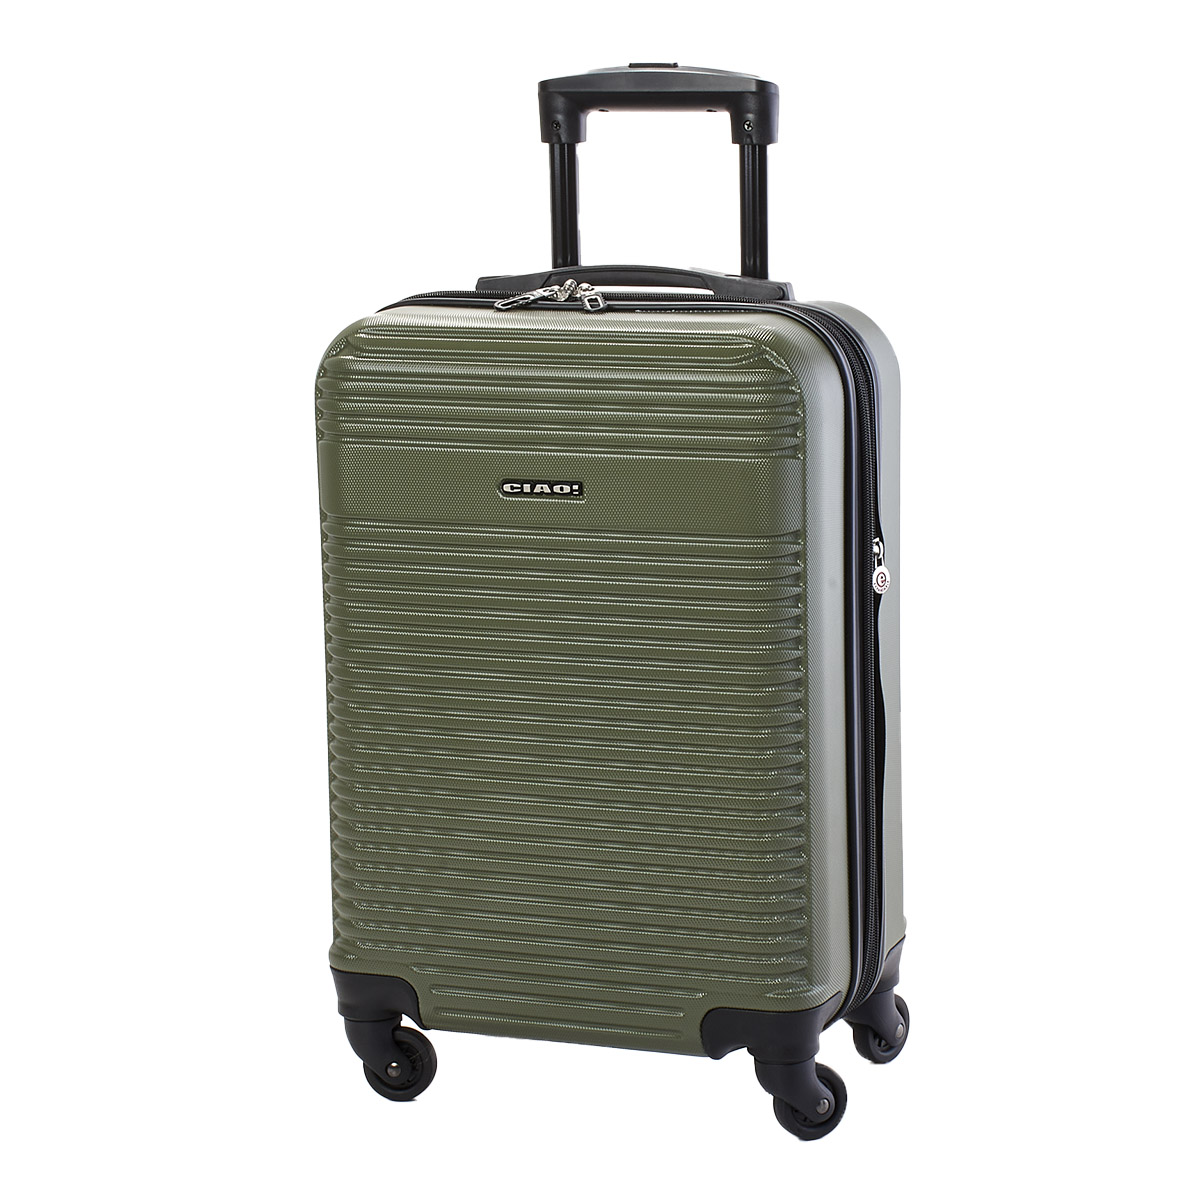 Ciao 24in. Hardside Spinner Luggage - Olive